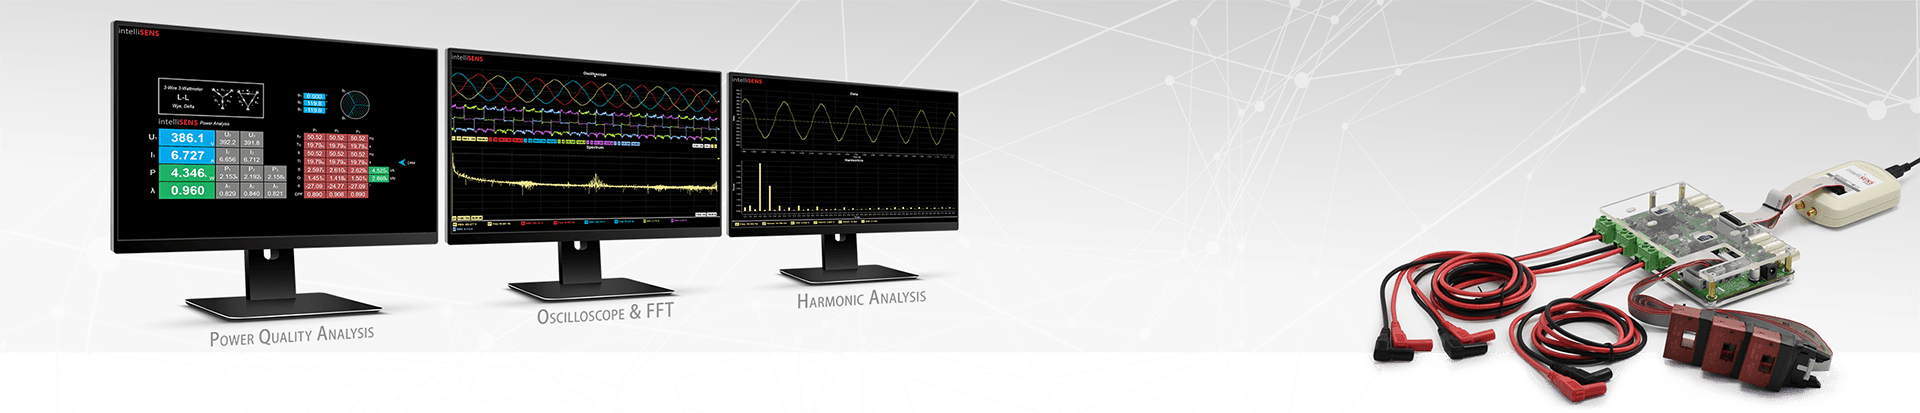 Power Electronics Measurement and DAQ System that can replace 3 phase power quality analyzer, oscilloscope & recorder